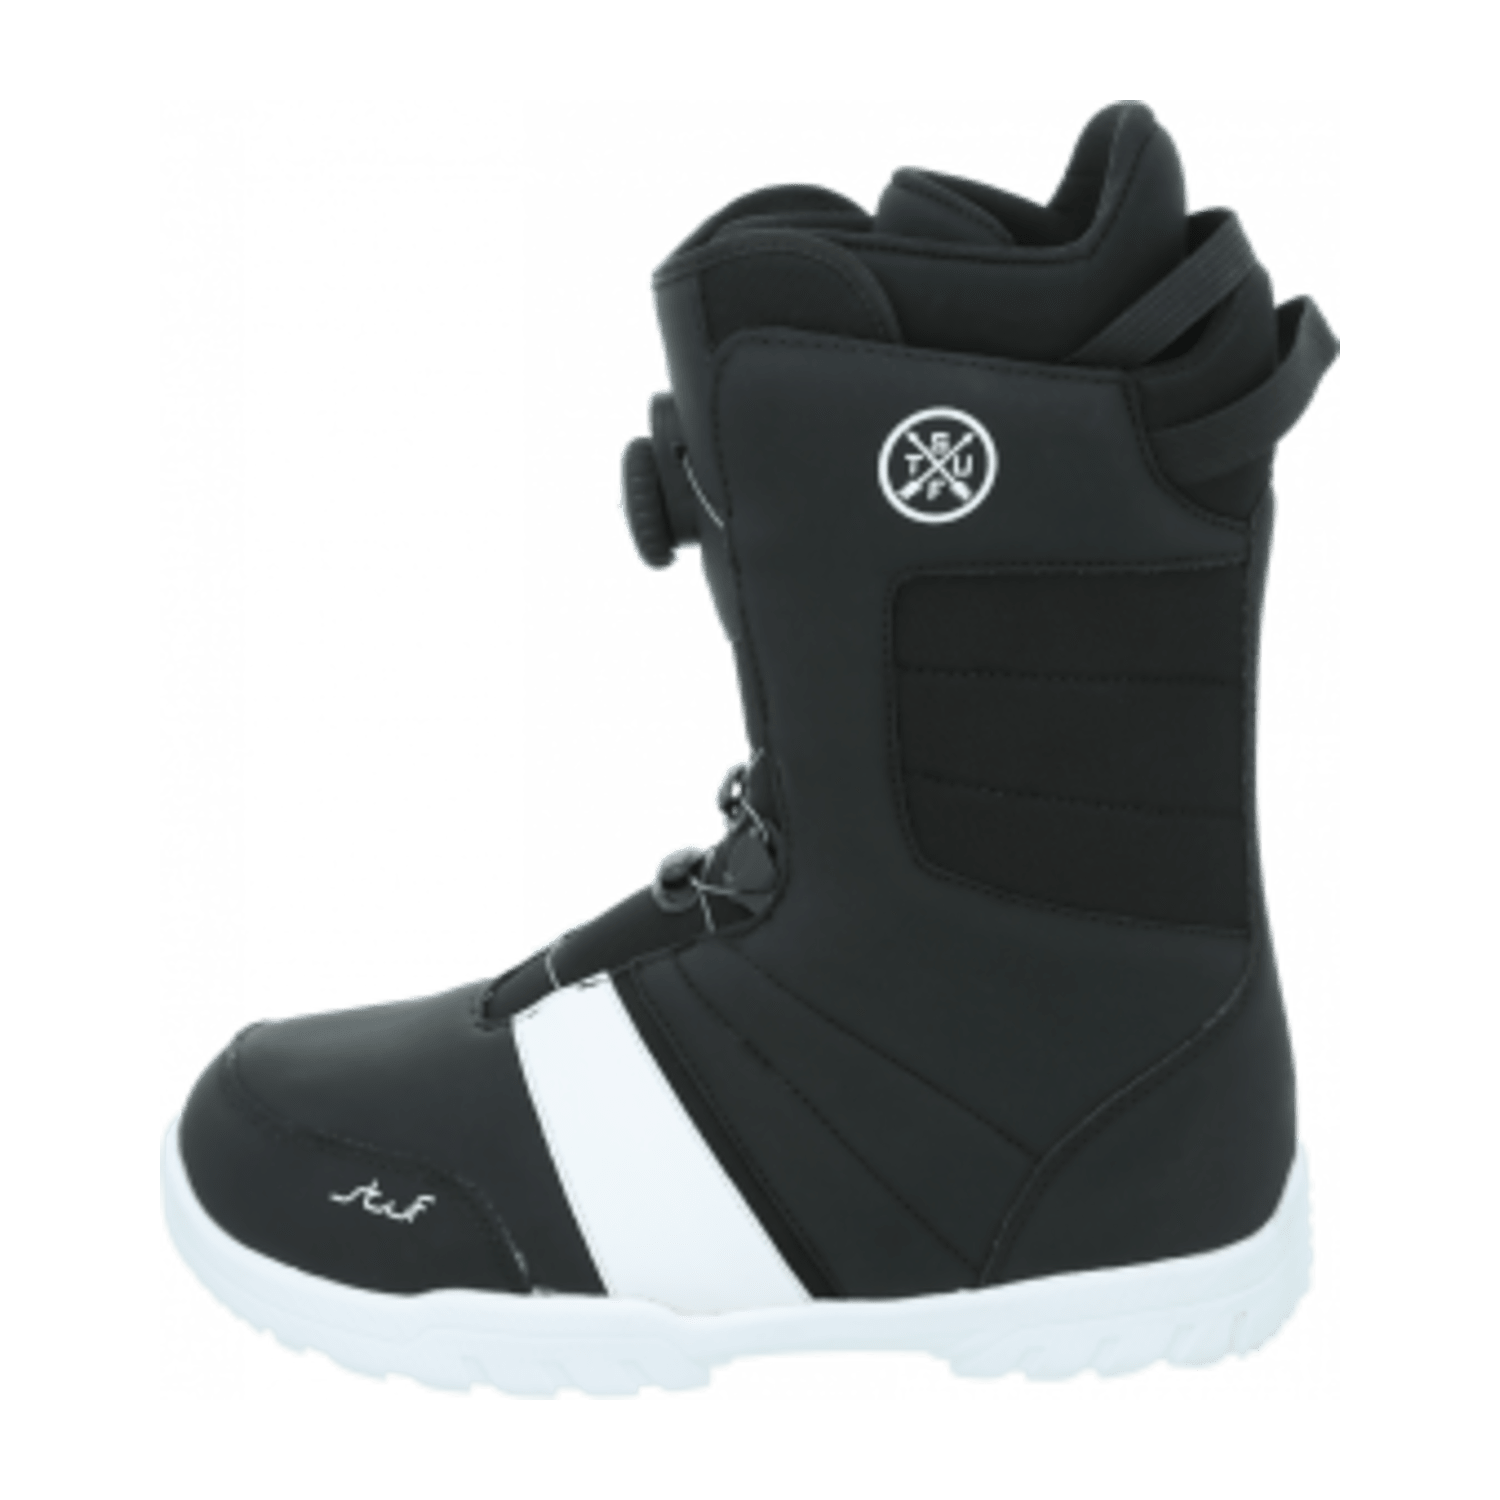 stuf Pure 2.0 AT Snowboardschuh